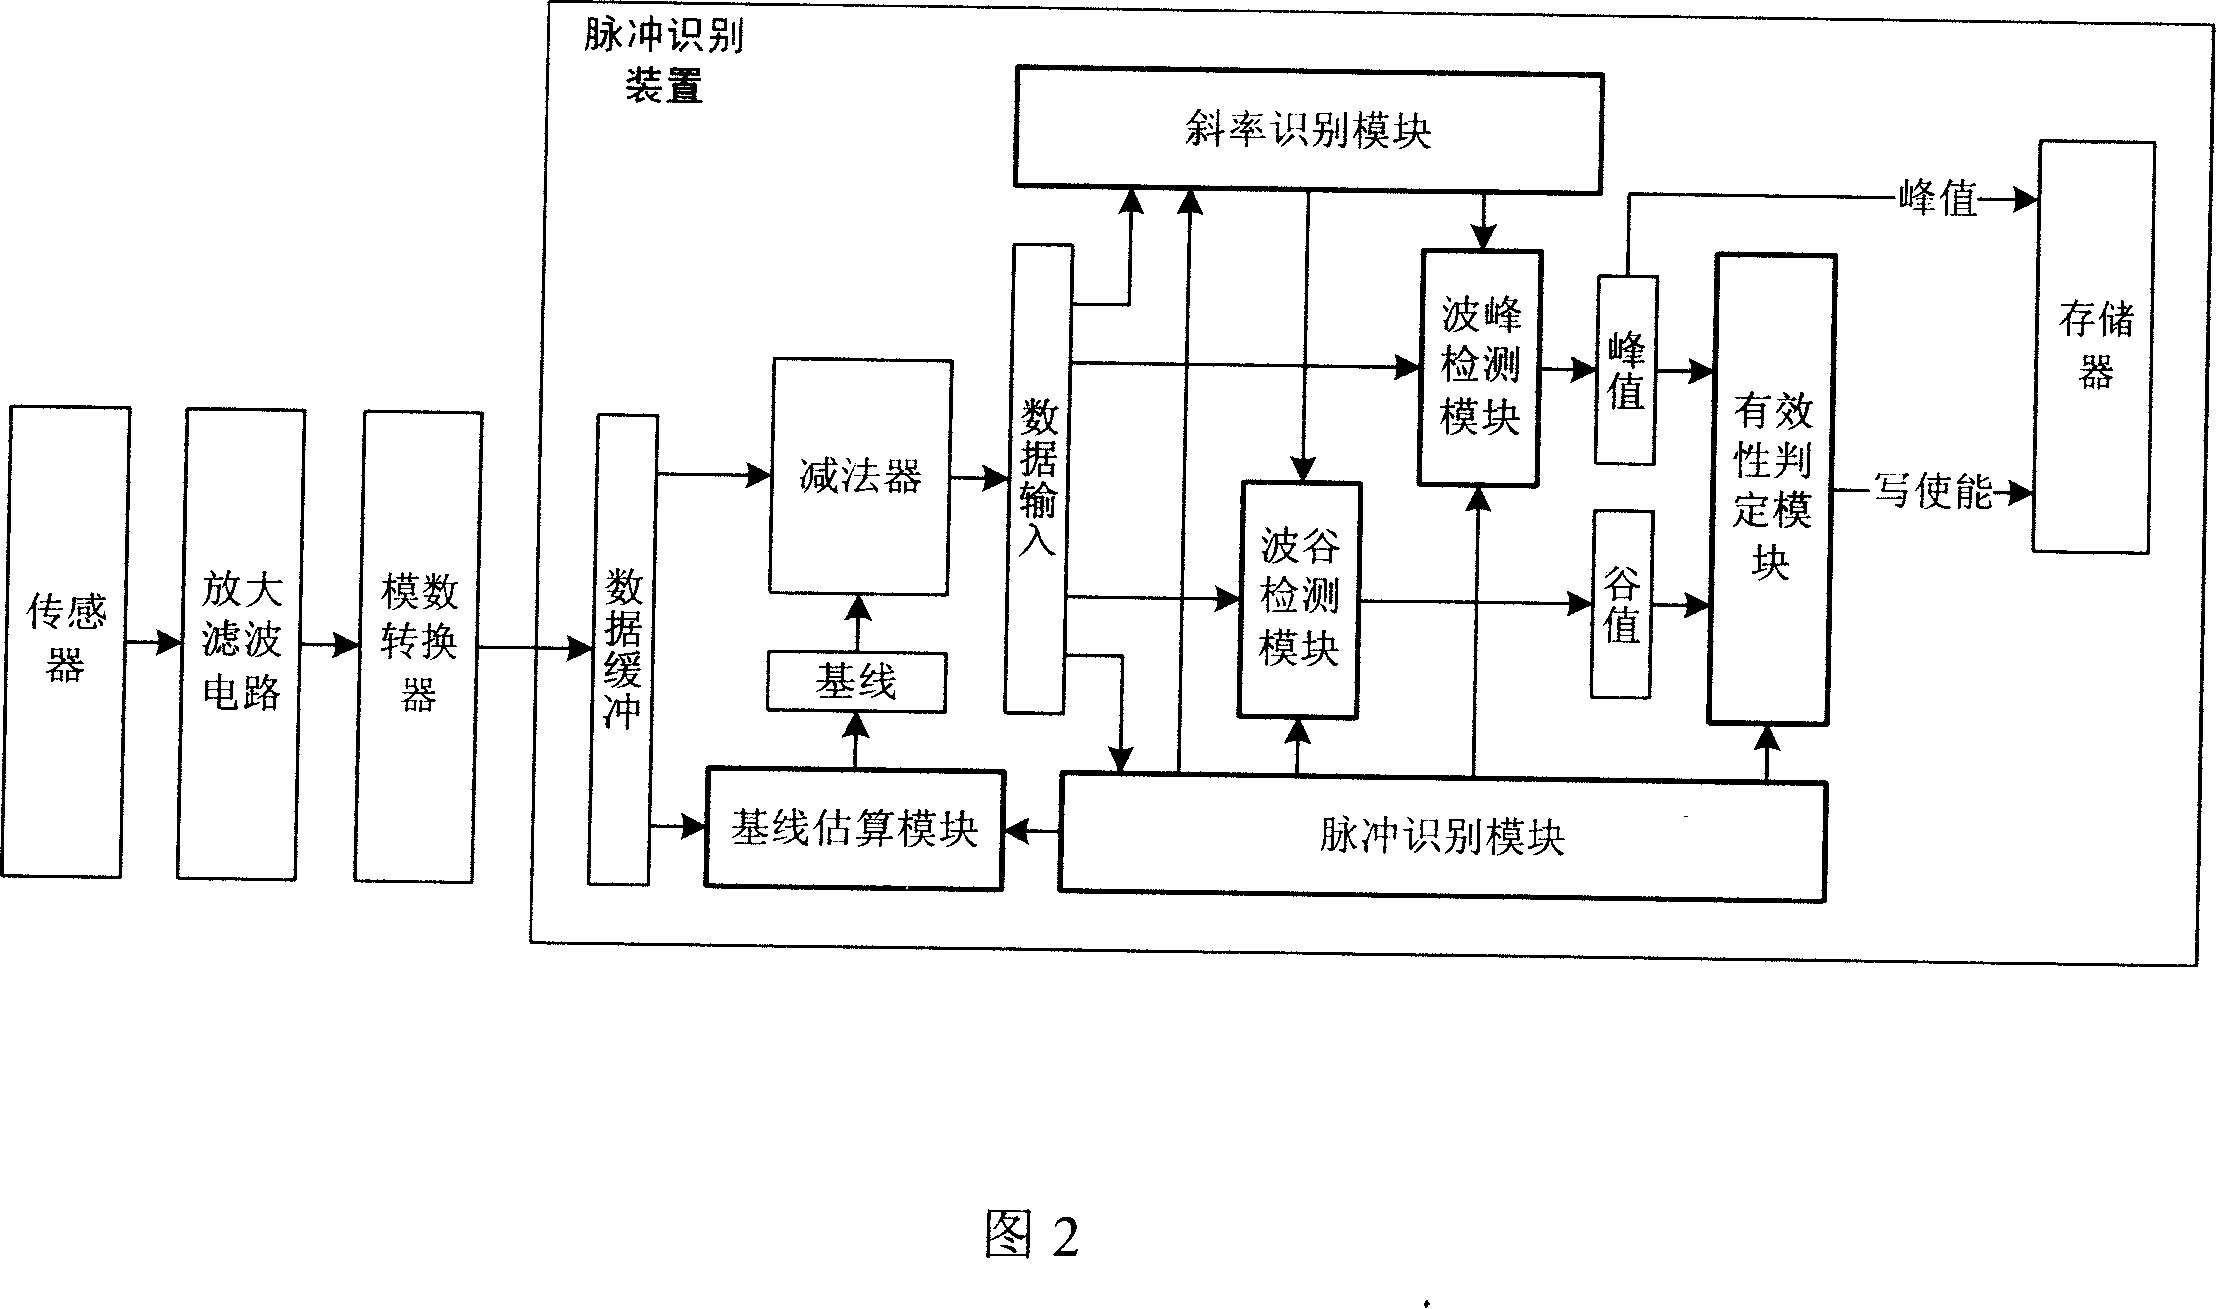 Pulsing signal recognition device and method